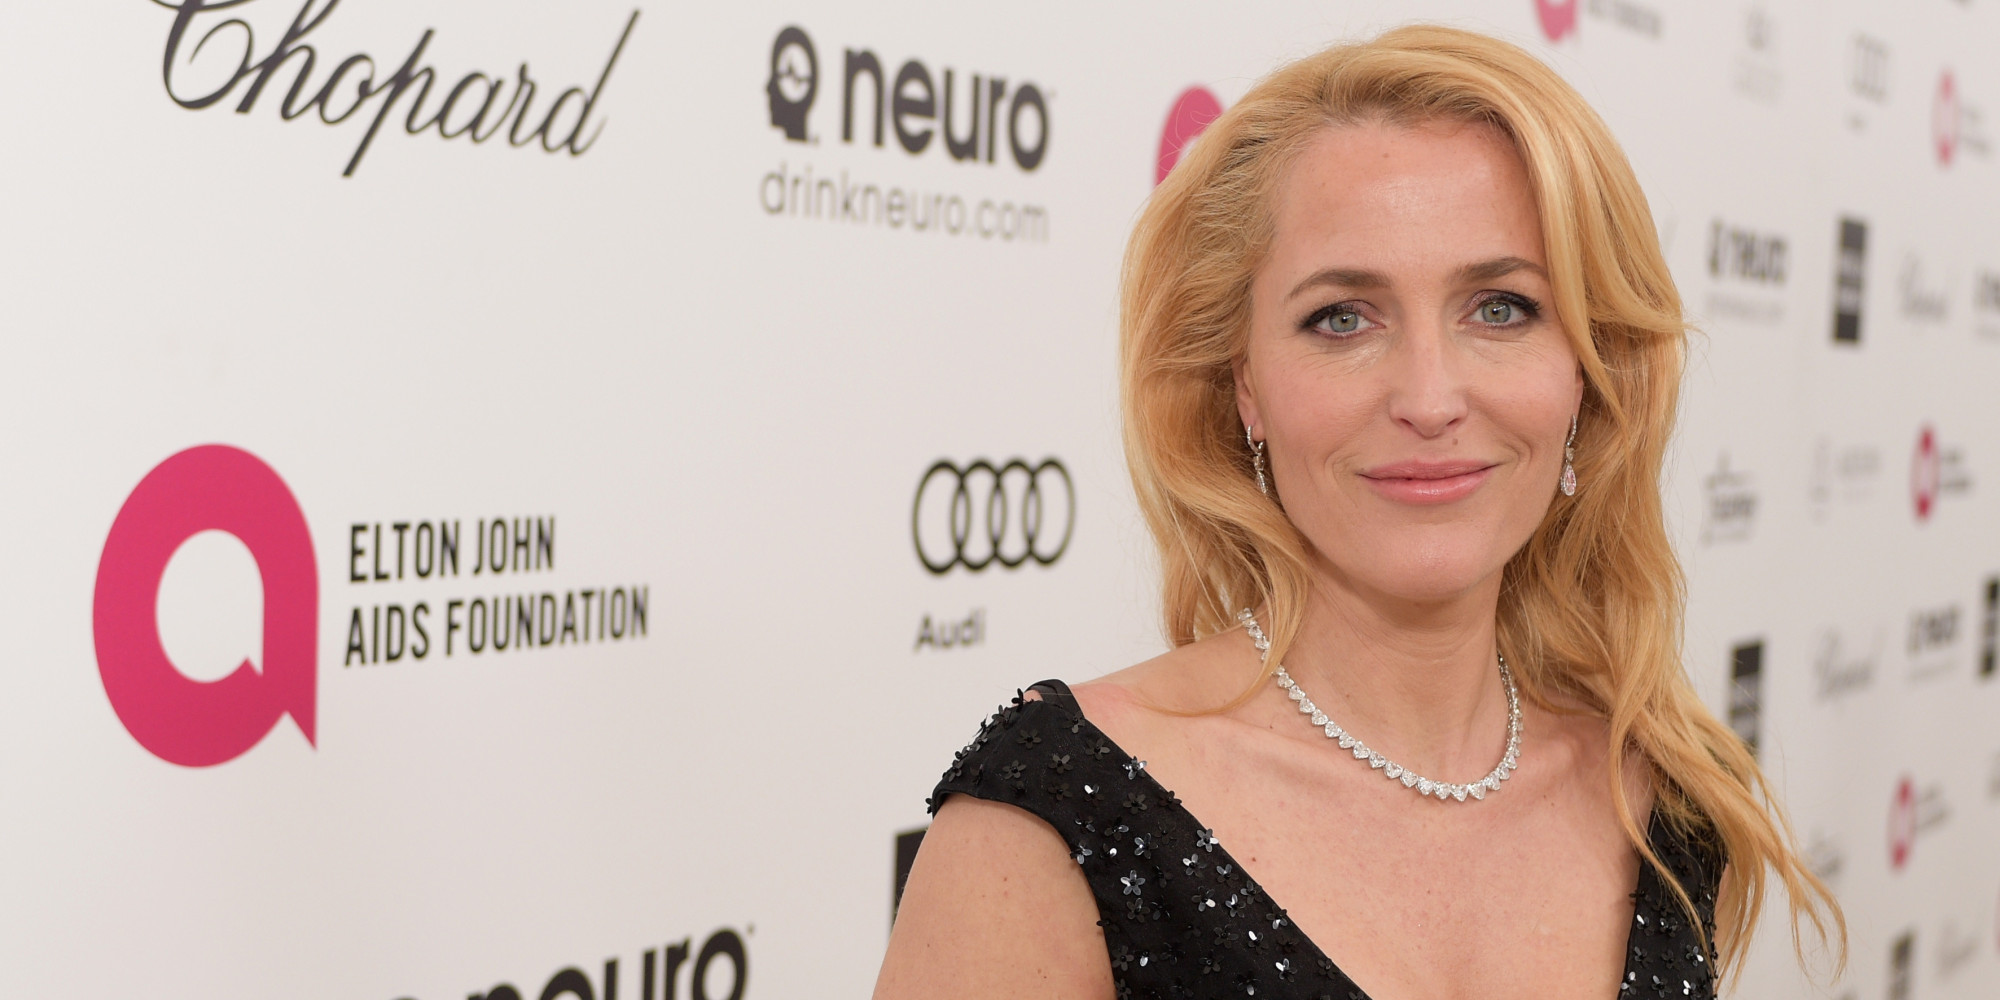 LOS ANGELES, CA - FEBRUARY 22: Actress Gillian Anderson attends the 23rd Annual Elton John AIDS Foundation Academy Awards viewing party with Chopard on February 22, 2015 in Los Angeles, California. (Photo by Stefanie Keenan/Getty Images for Chopard)